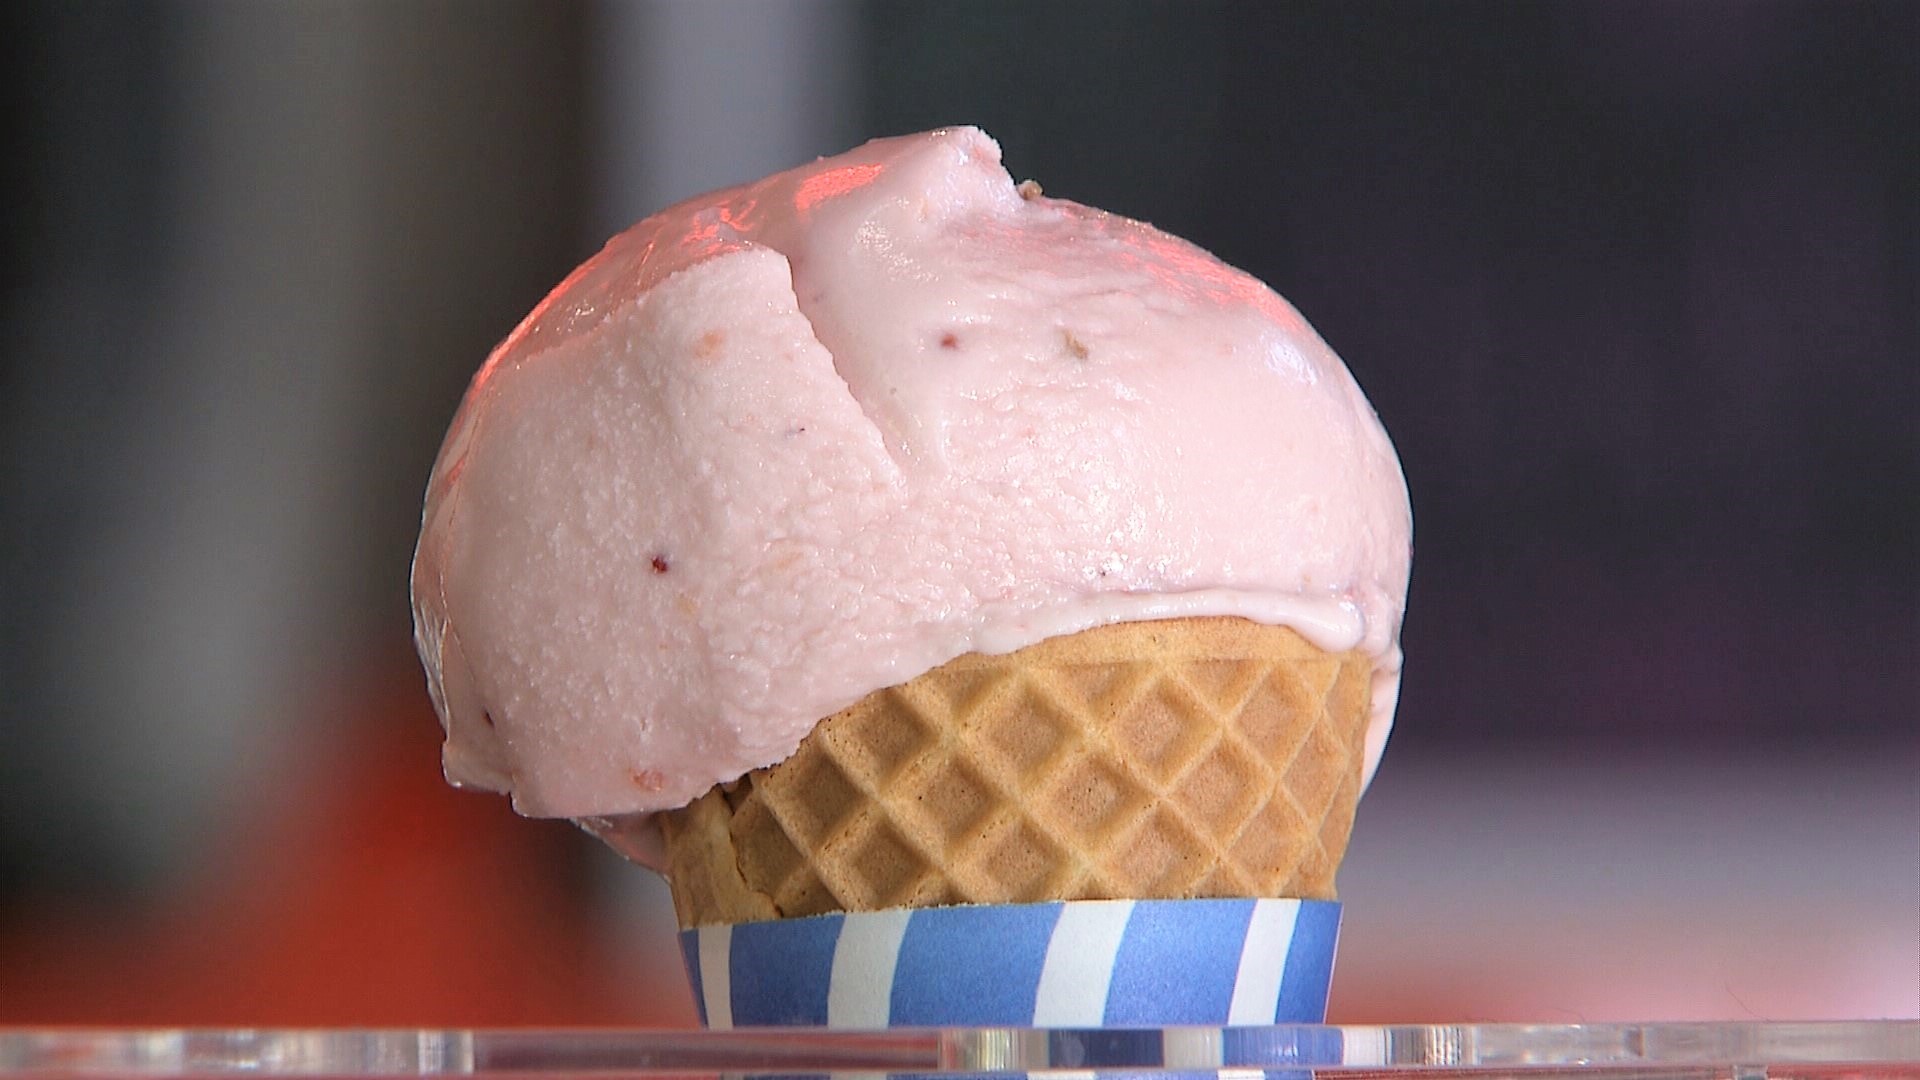 ACME Ice Cream in Bellingham is made using berries and cream from Whatcom County farmland